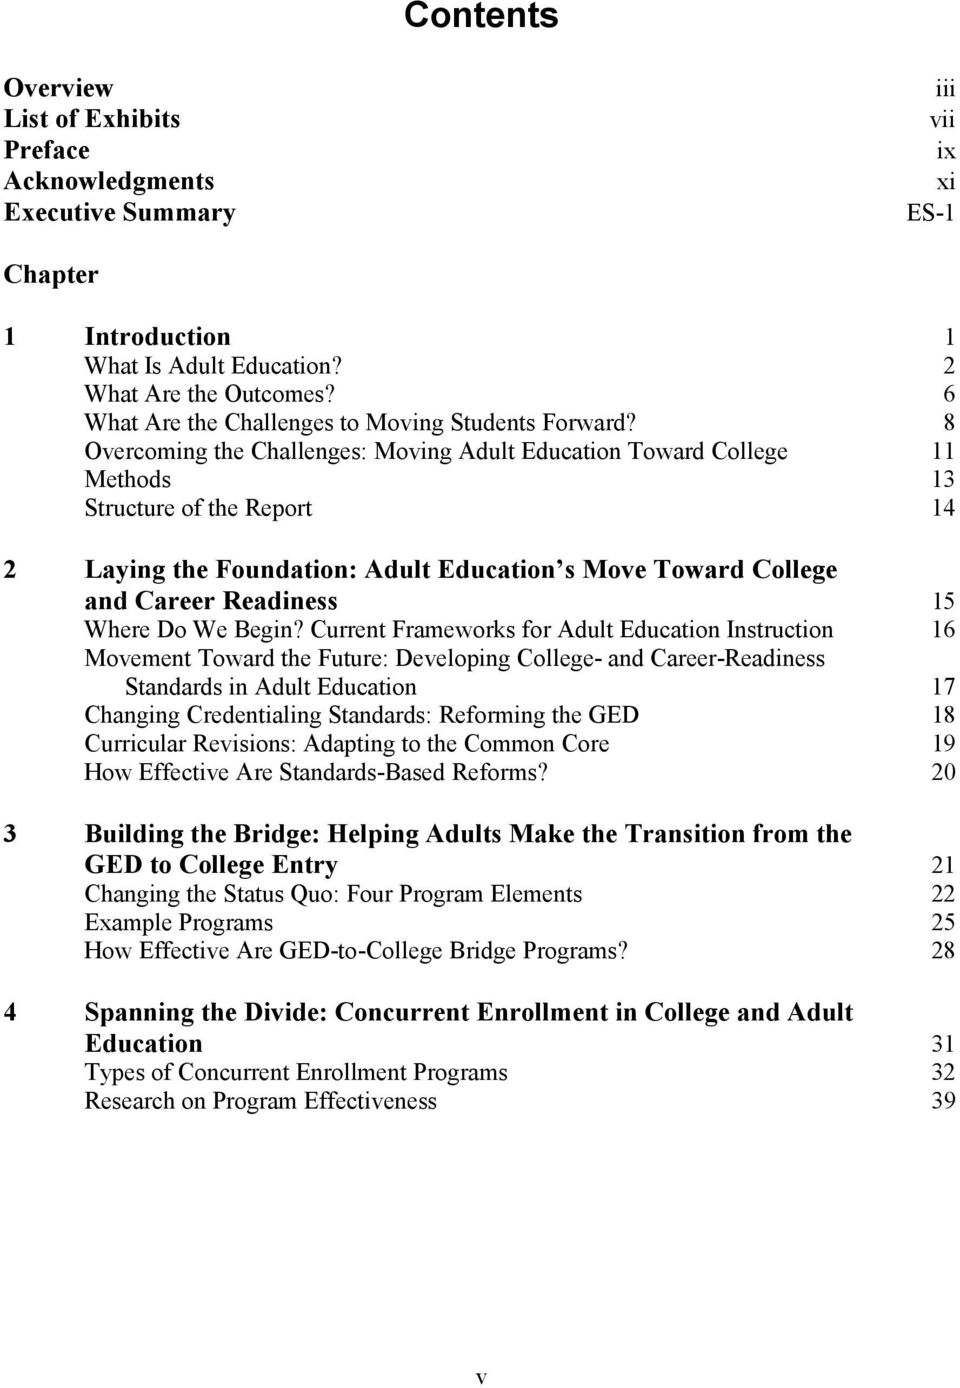 8 Overcoming the Challenges: Moving Adult Education Toward College 11 Methods 13 Structure of the Report 14 2 Laying the Foundation: Adult Education s Move Toward College and Career Readiness 15